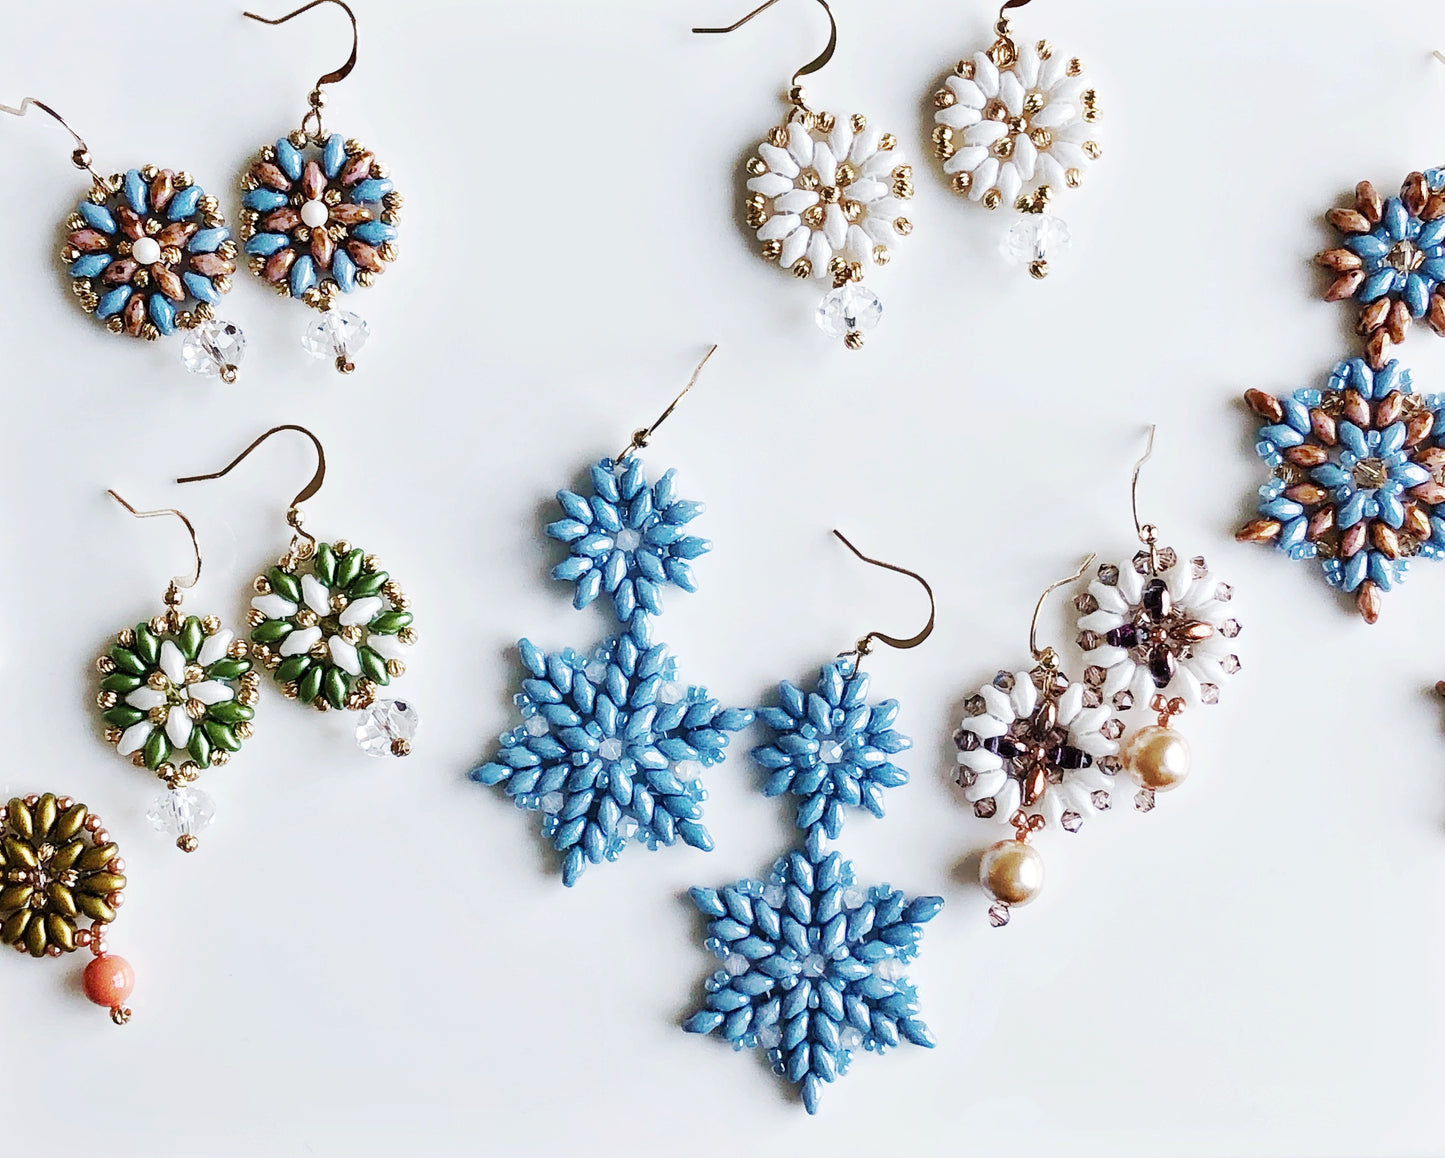 Snowflakes glass and crystals earrings in blue